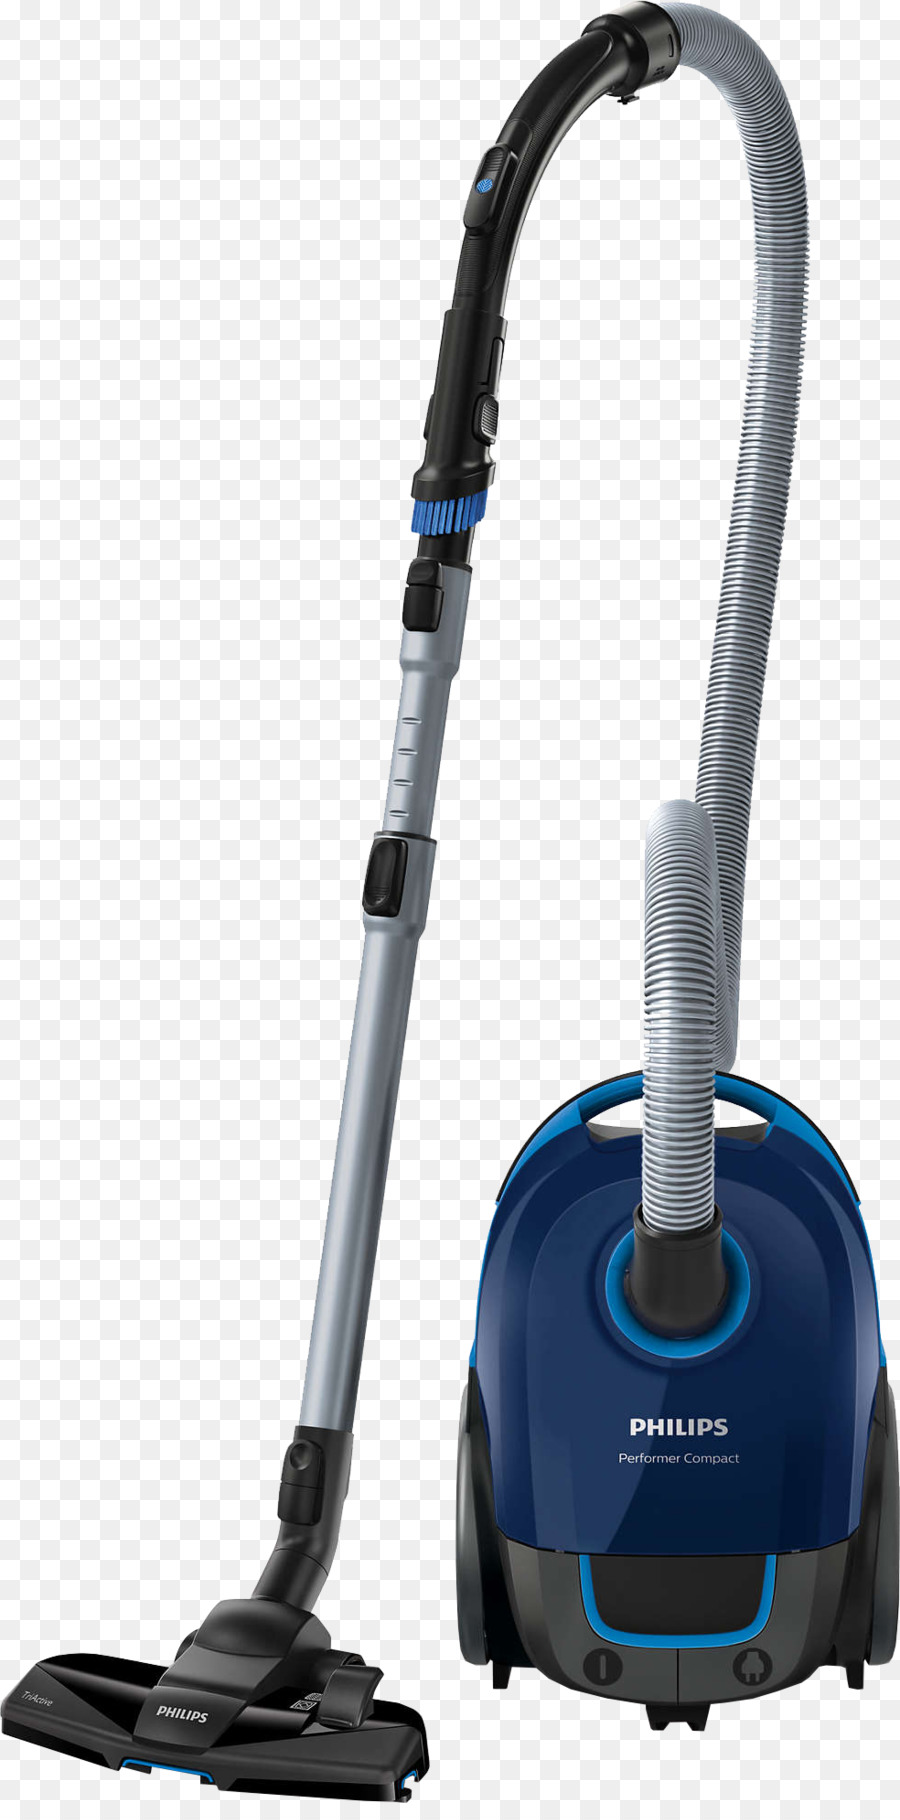 Aspirateur，Philips Performer Compact PNG